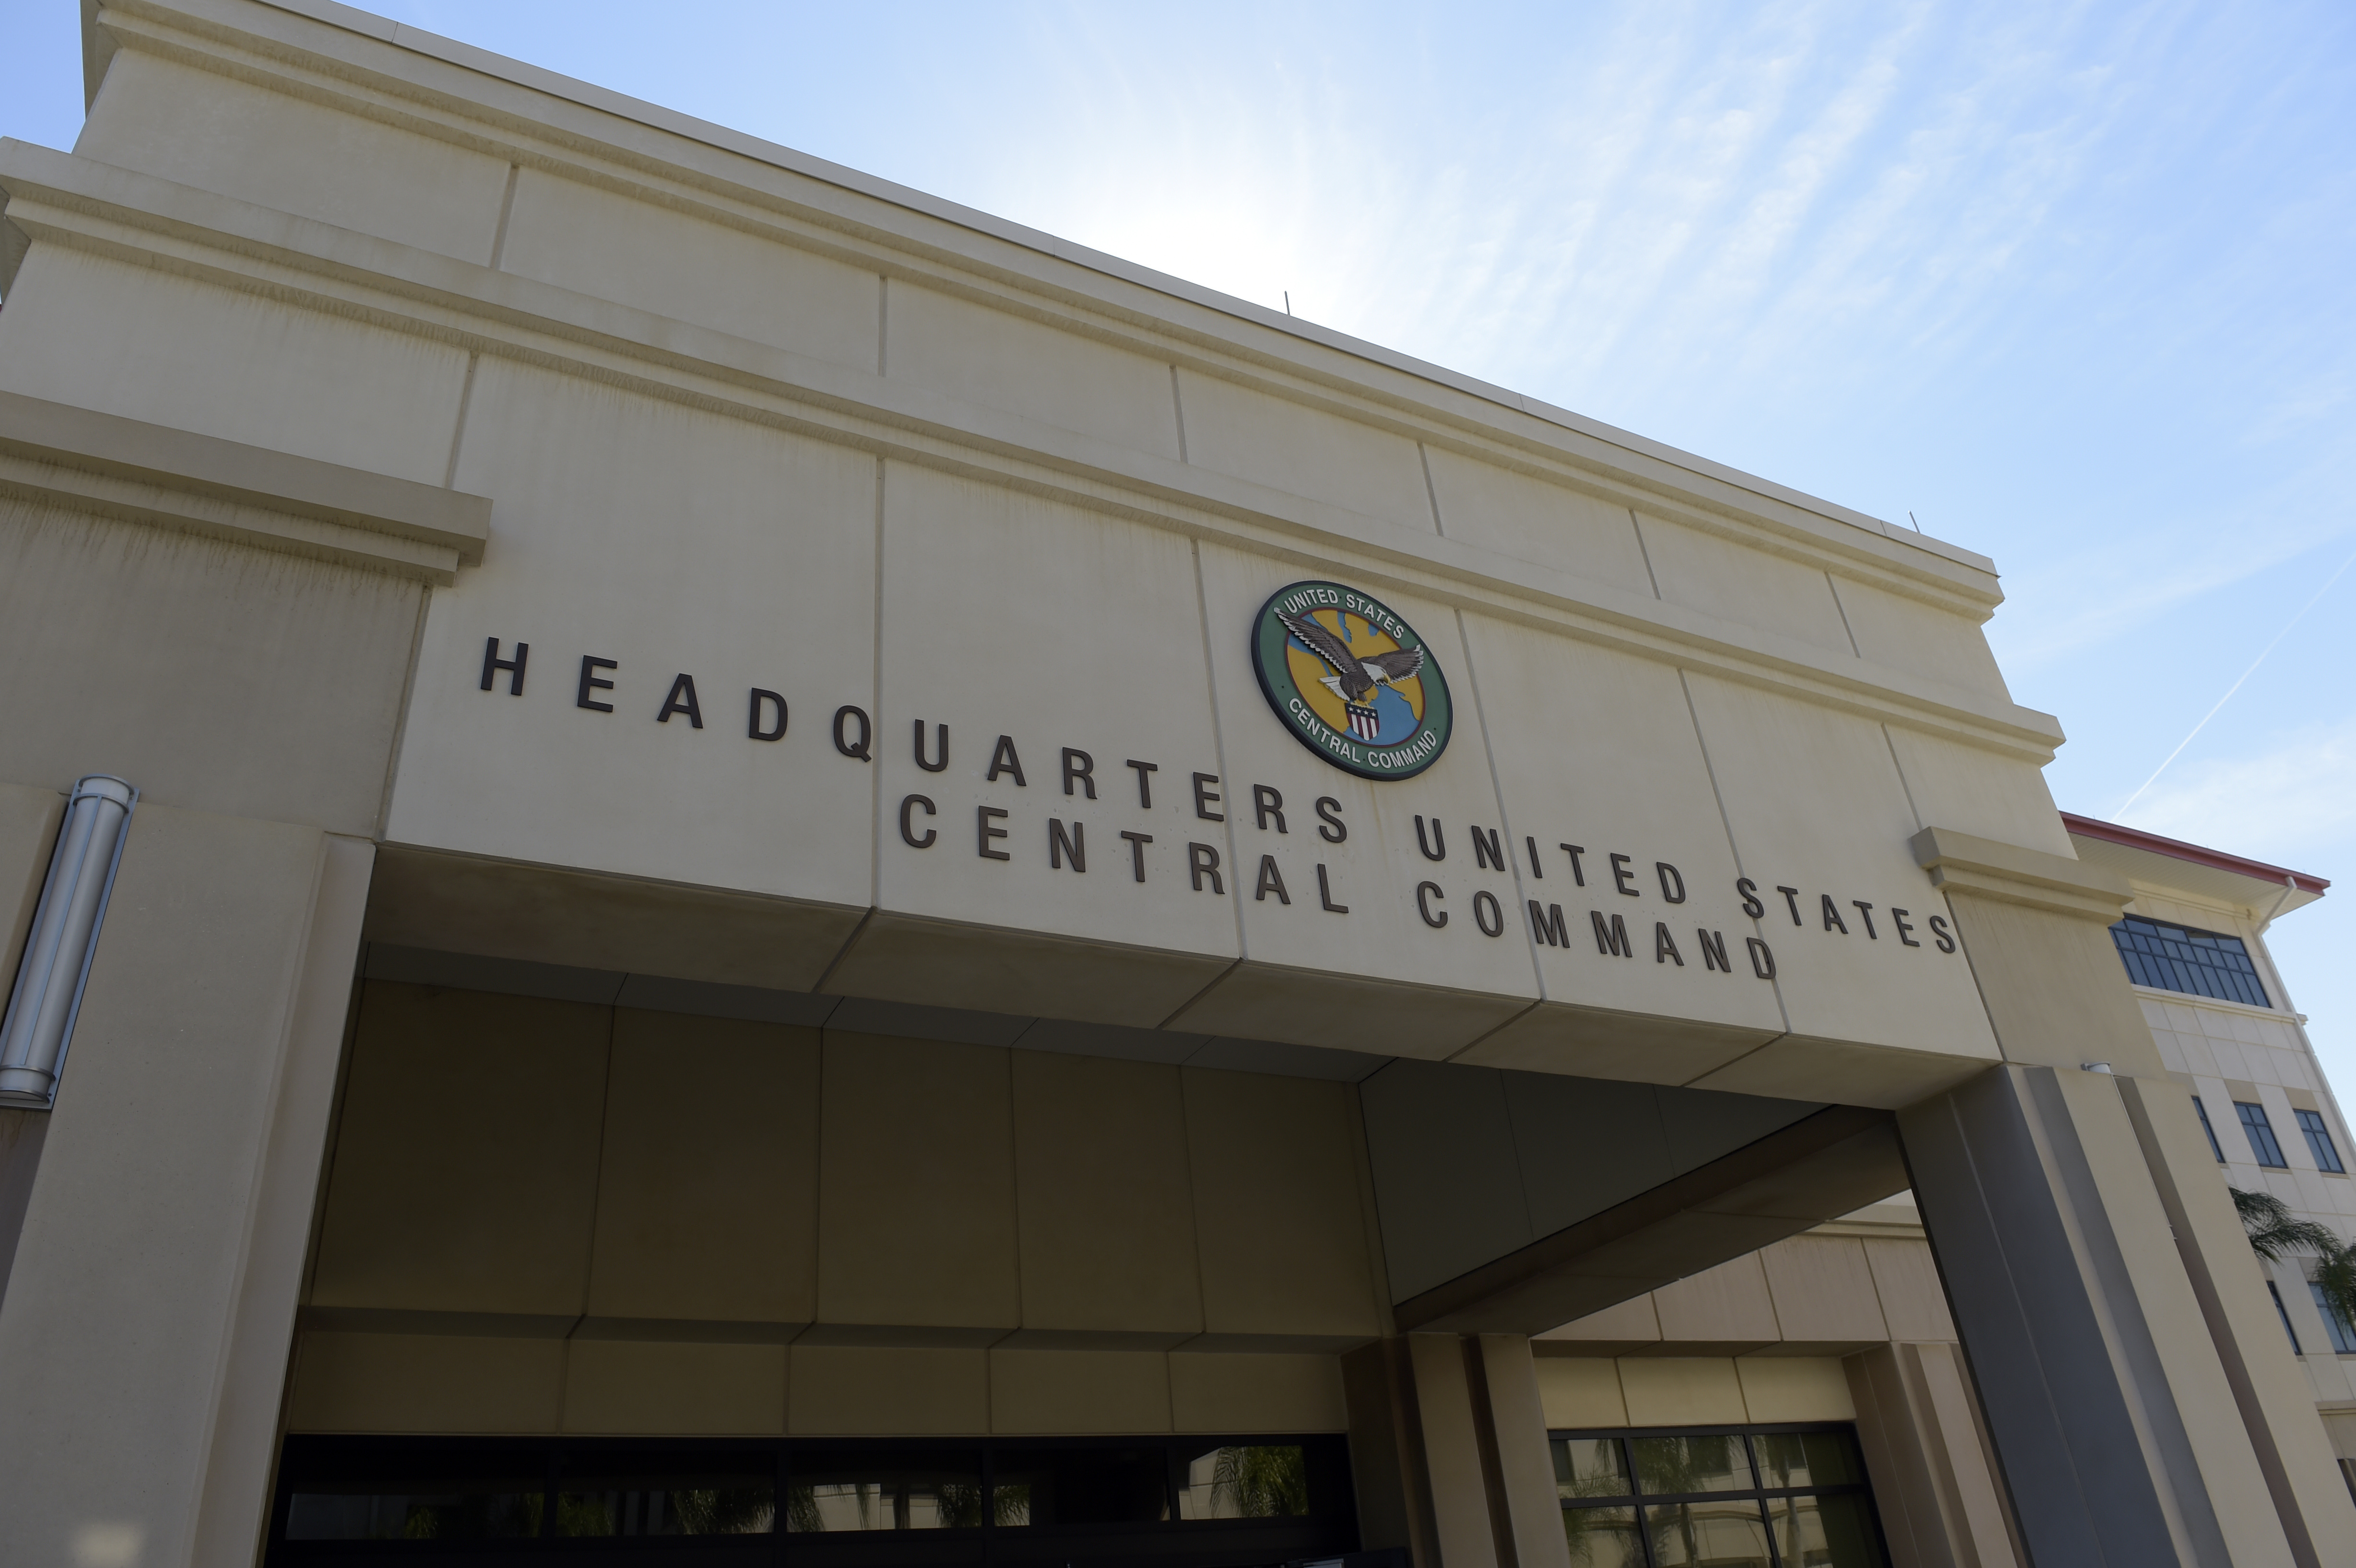 The headquarters of the United States Central Command at MacDill Air Force Base in Tampa, Florida, is pictured on February 6, 2017.